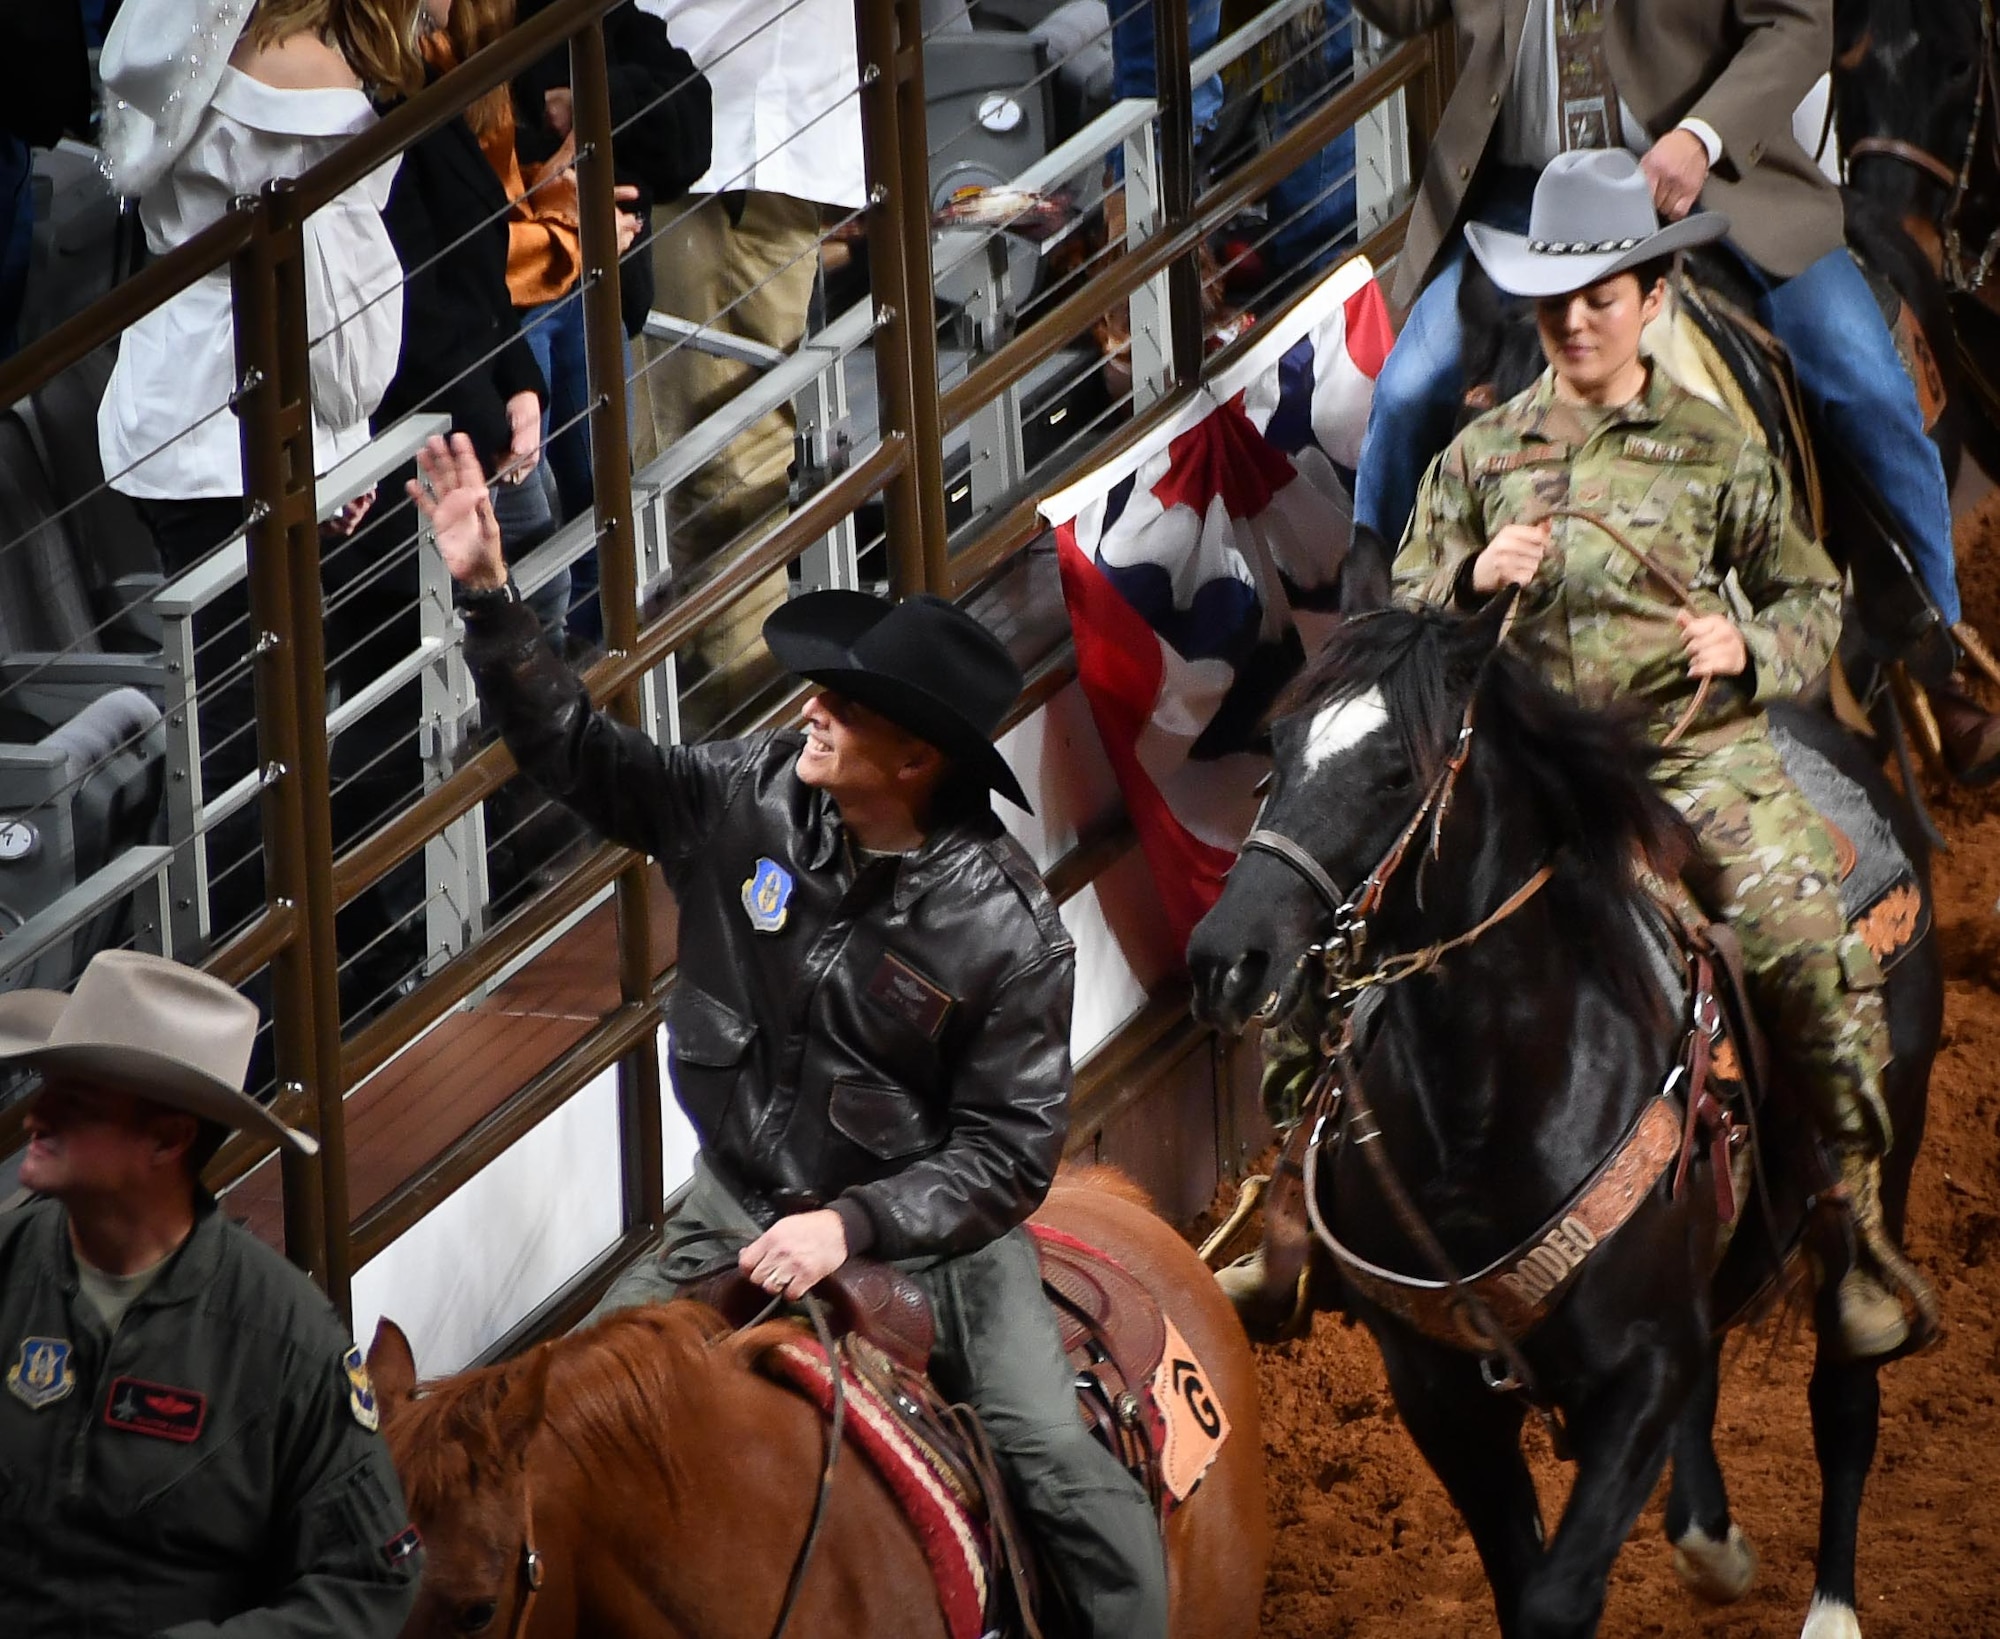 301st Fighter Wing Vice Commander Col. Randall Cason, Senior Airman Brooke Pirrone, 301 FW tactical aircraft maintenance crew chief, and 301 FW Director of Staff Col. Kevin Zeller greet the crowd during the Grand Entry at the Fort Worth Stock Show and Rodeo at Dickie’s Arena on February 3, 2020. Among the procession was Fort Worth Mayor Betsy Price and U.S. Naval Air Station Joint Reserve Base Fort Worth Commander Capt. Jonathan Townsend. (U.S. Air Force Photo by Master Sgt. Jeremy Roman)